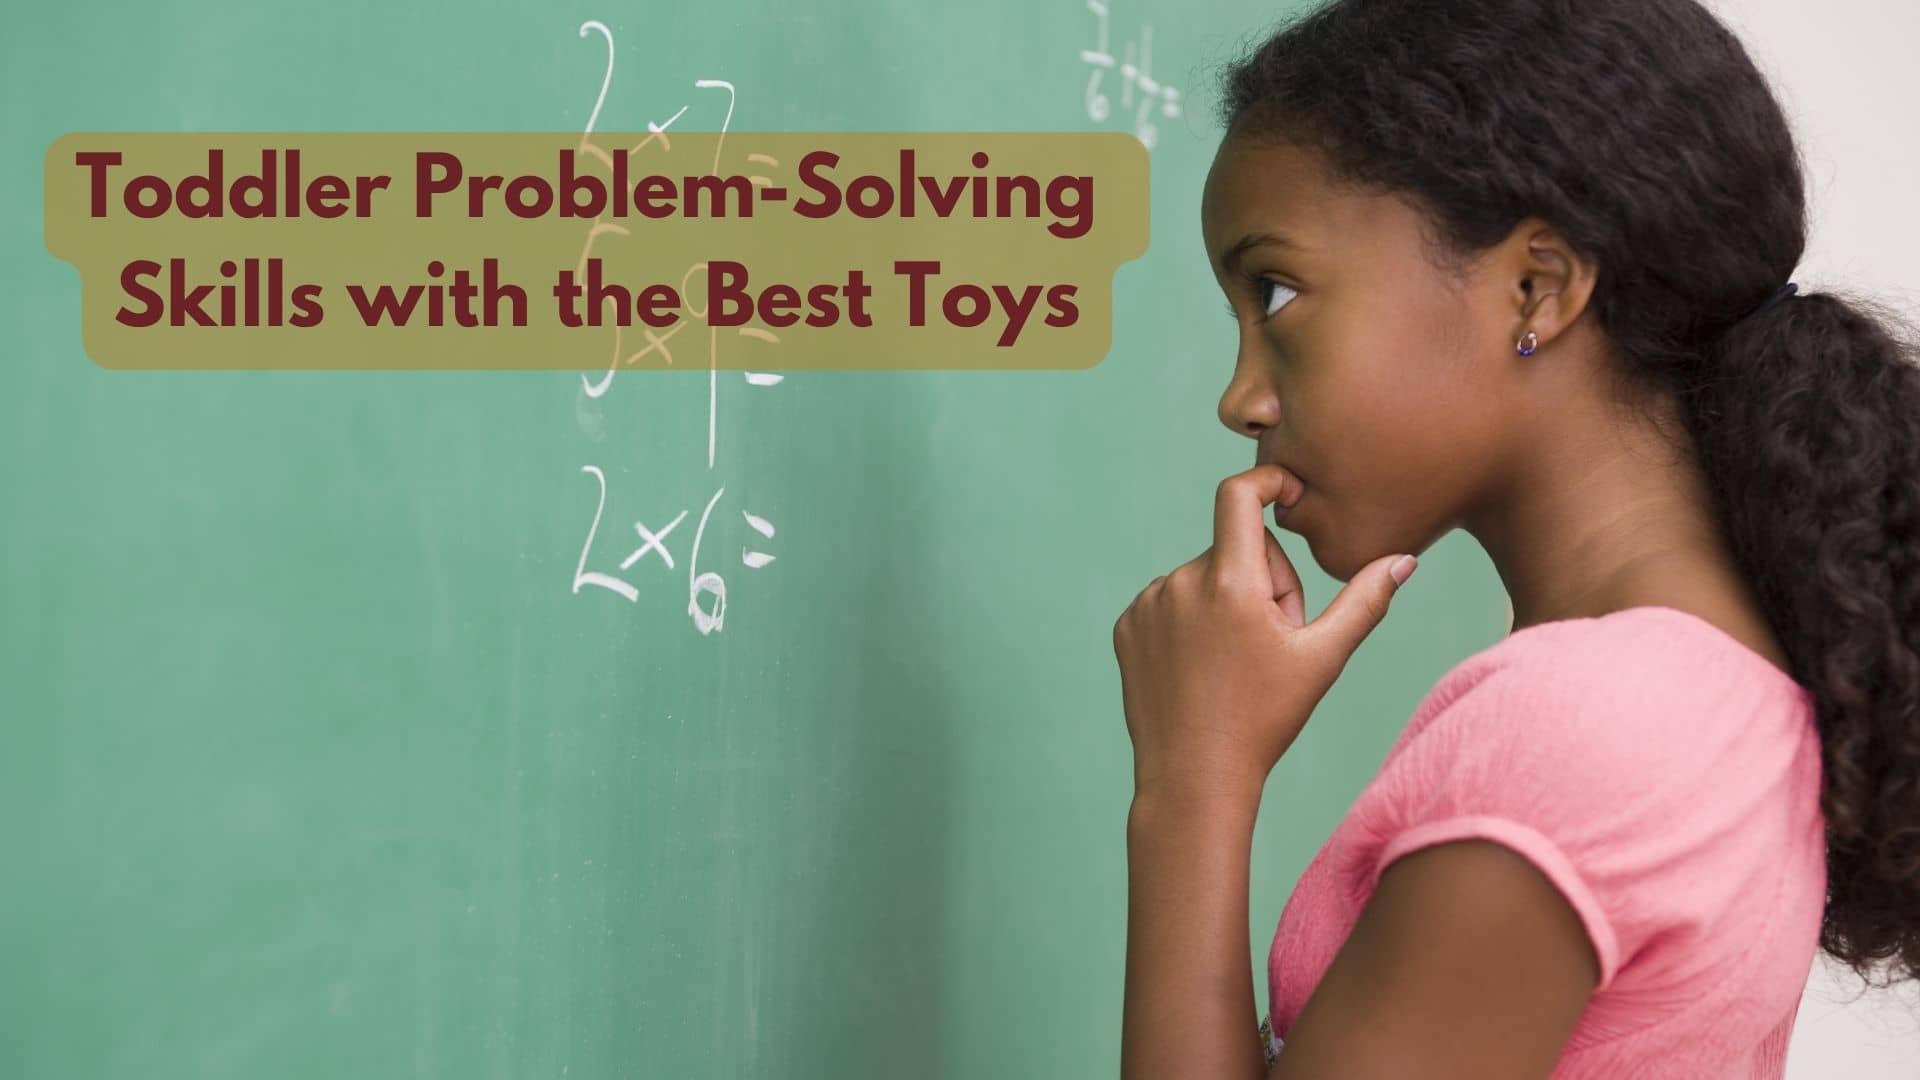 What Are The Best Toys For Promoting Problem-solving Skills In Toddlers?